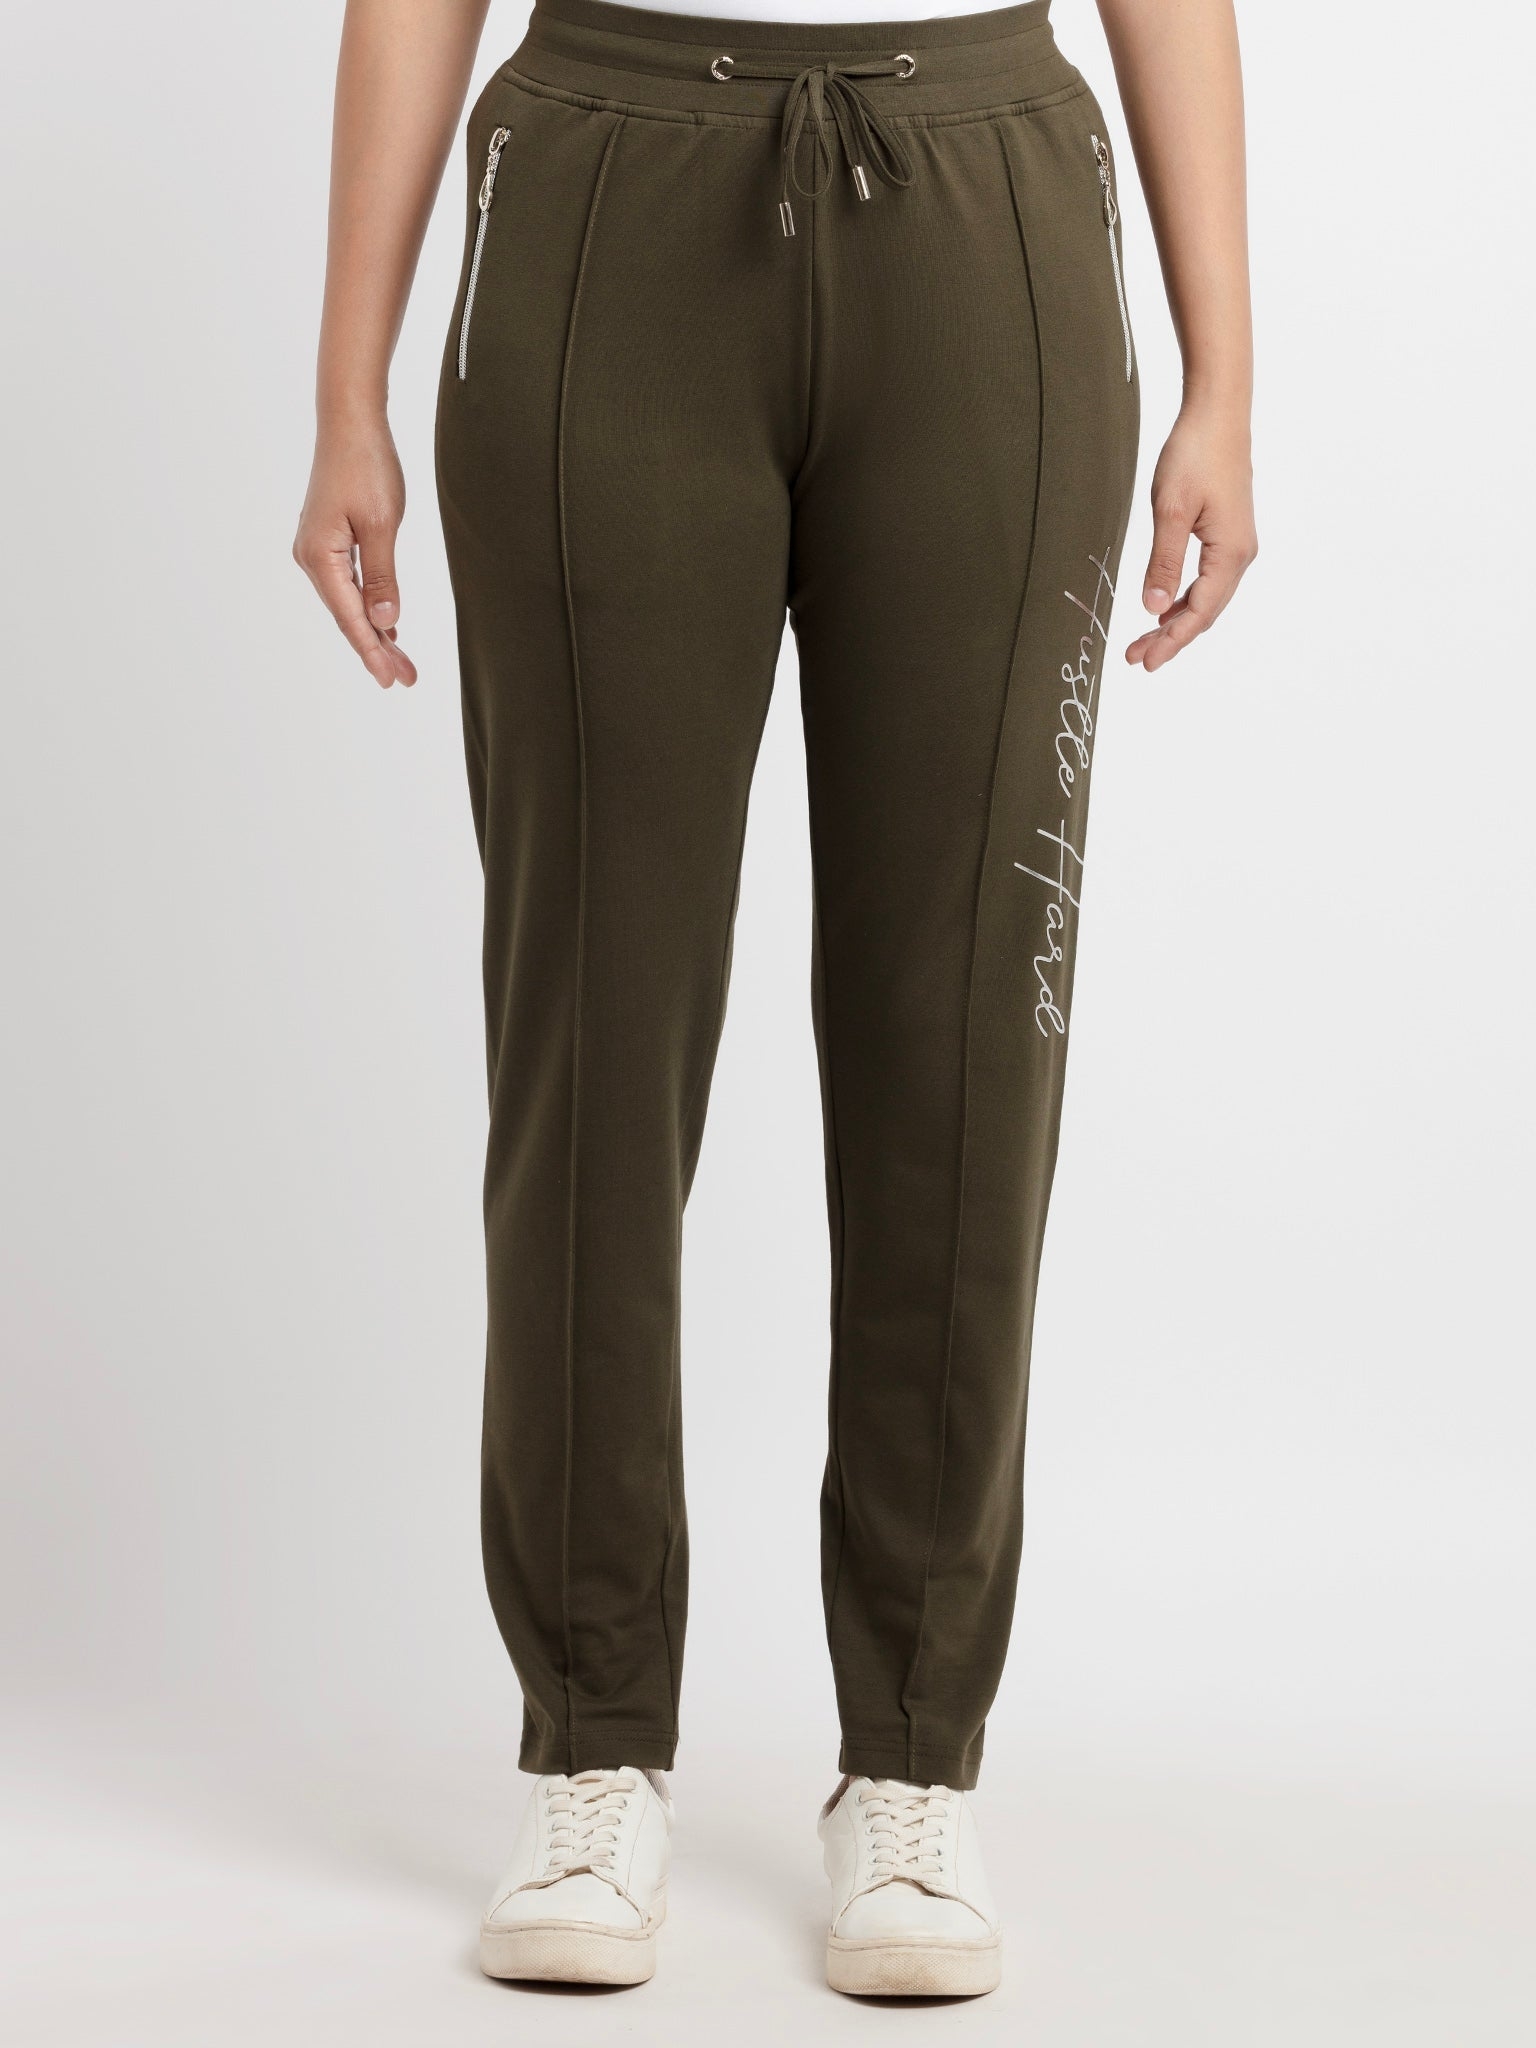 Status Quo | Women'ss Ankle length Printed Joggers